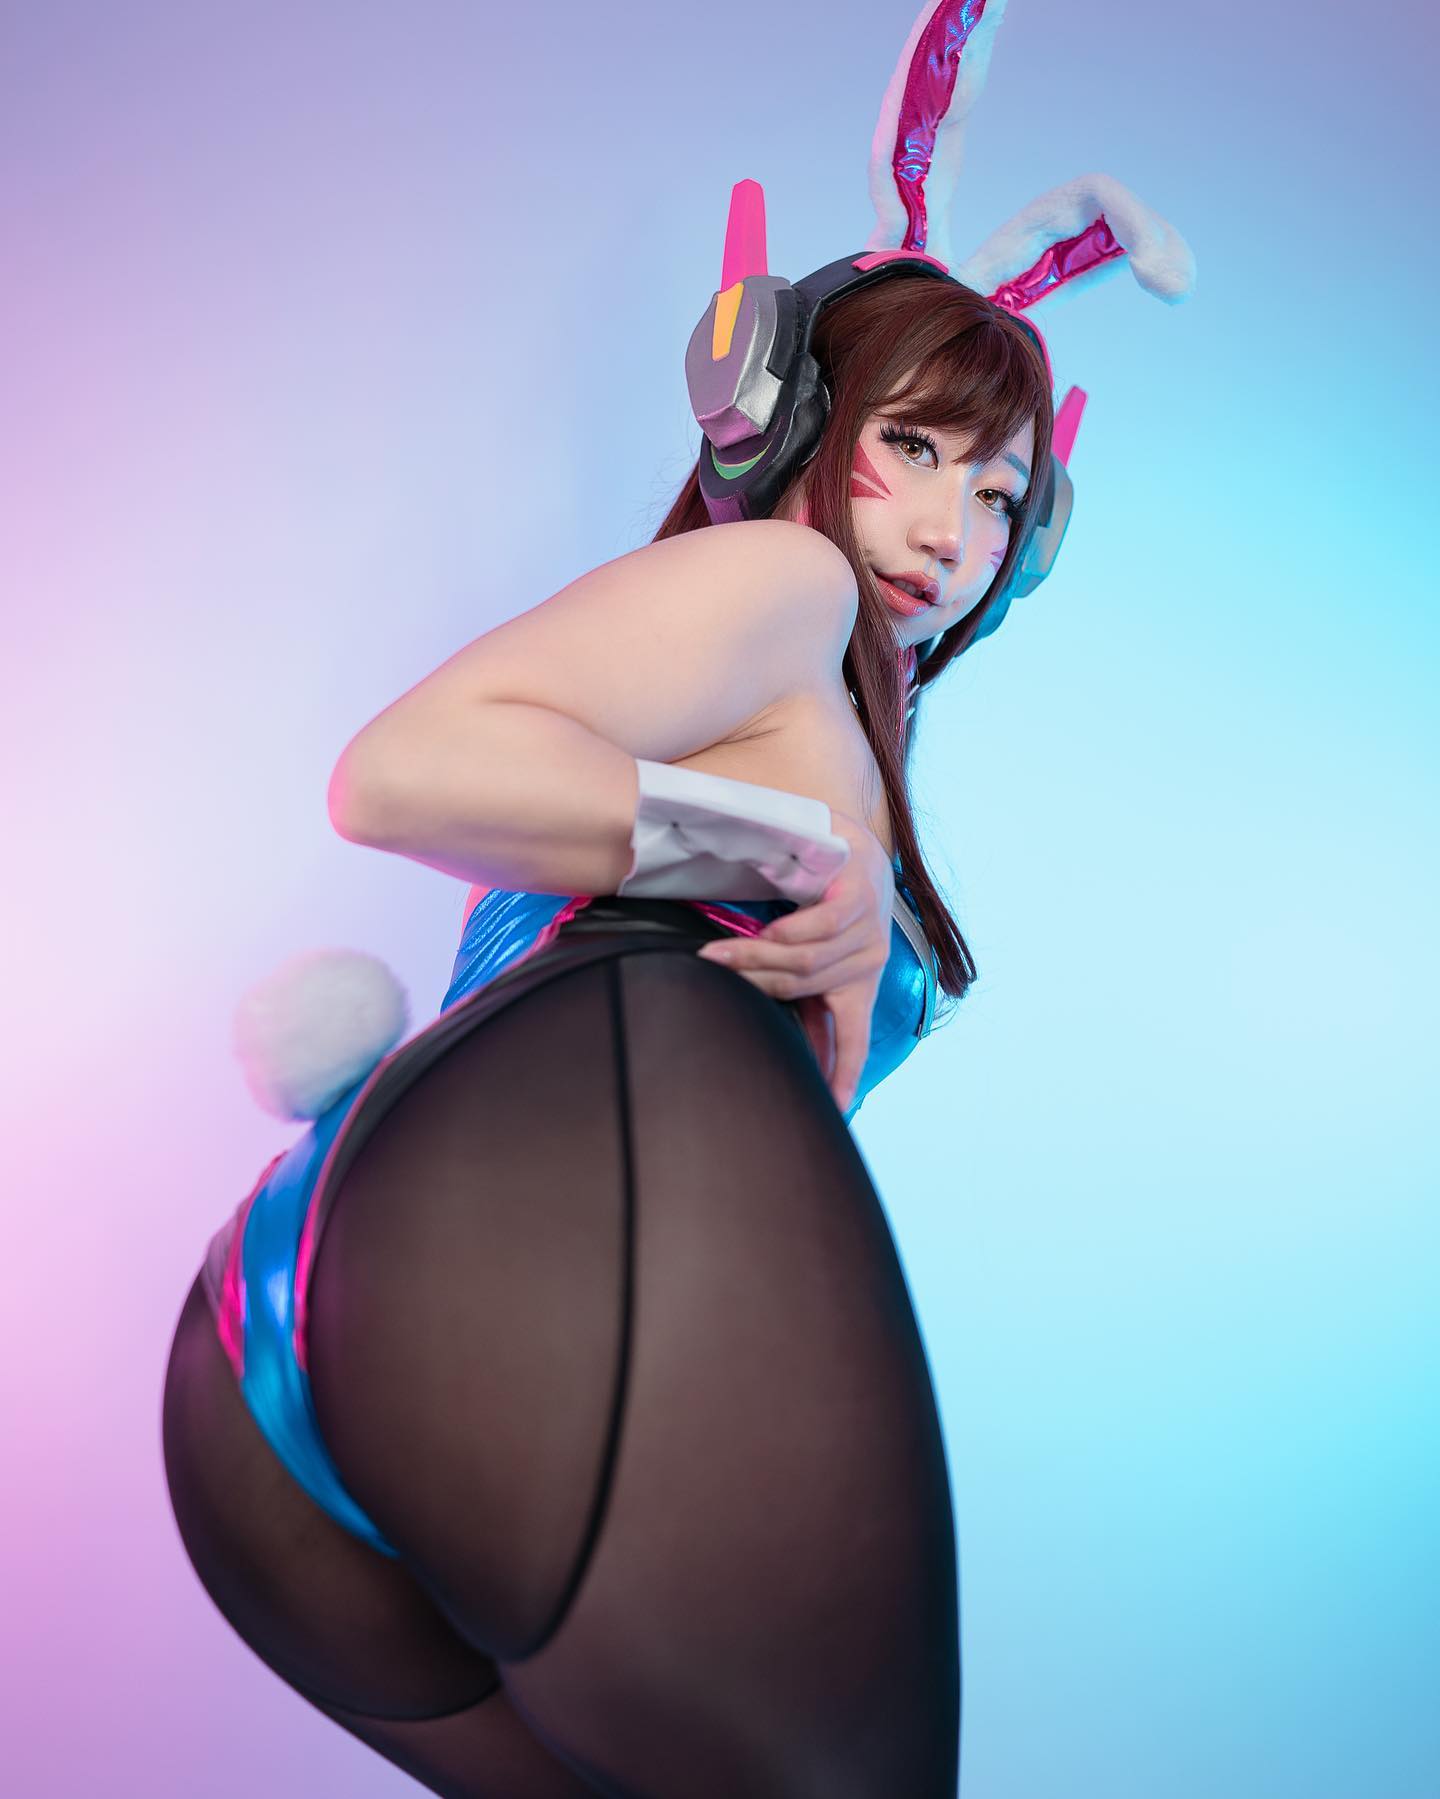 time to save the world? game on 🎮
•
#cosplaygirl #bunnygirl #overwatch #dvaoverwatch #gamergirl